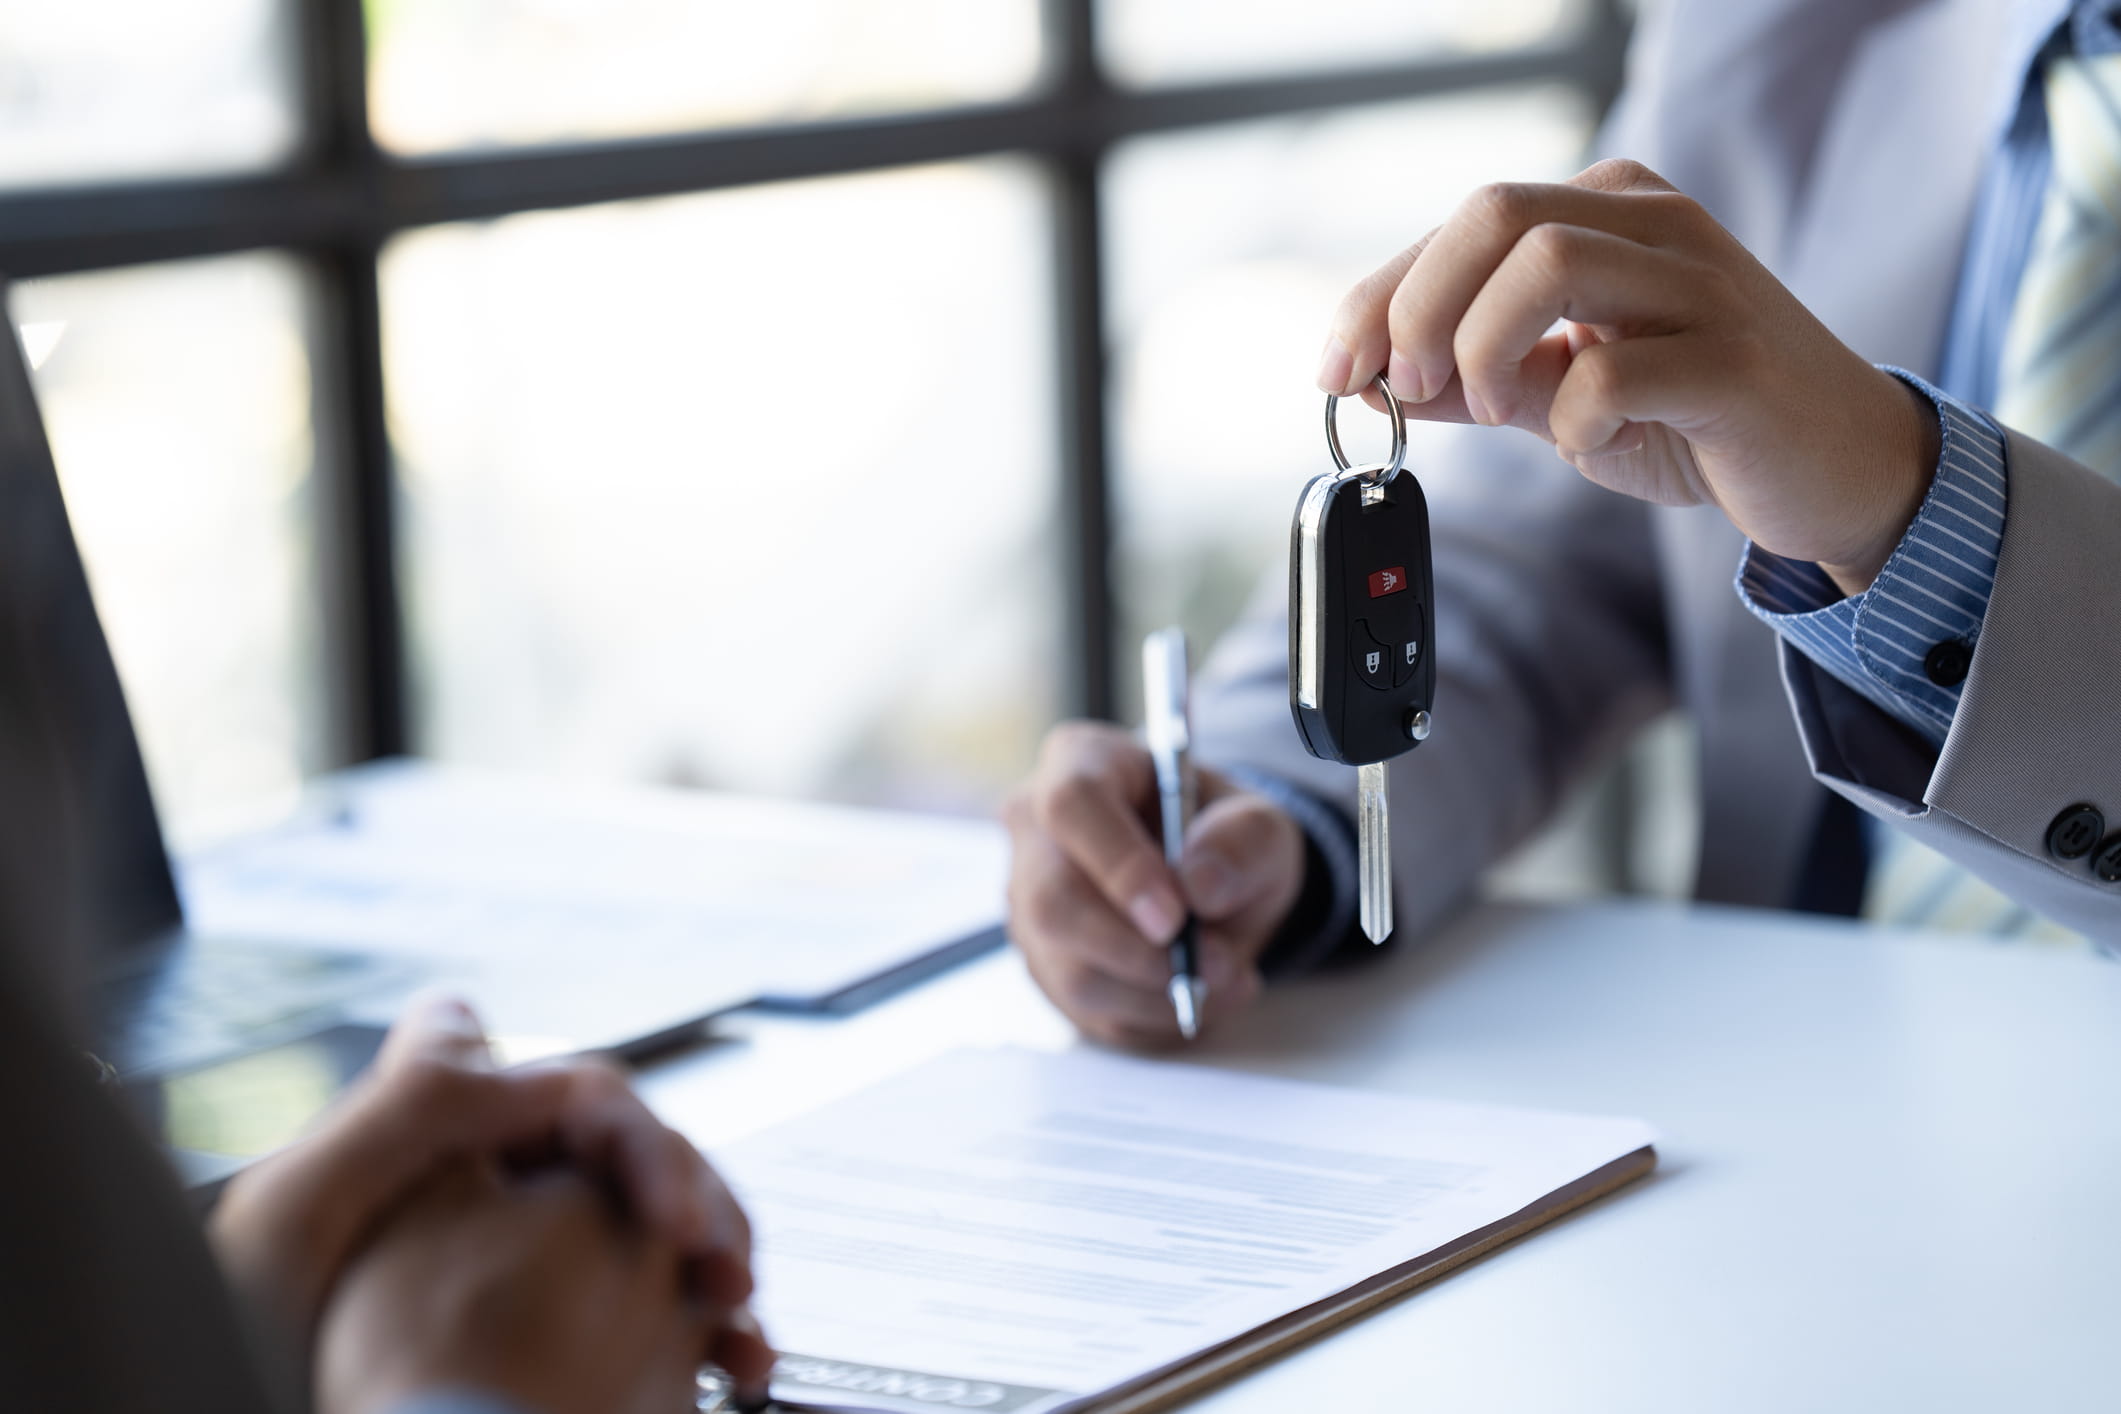 auto insurance agent handing keys to client as they sign documents